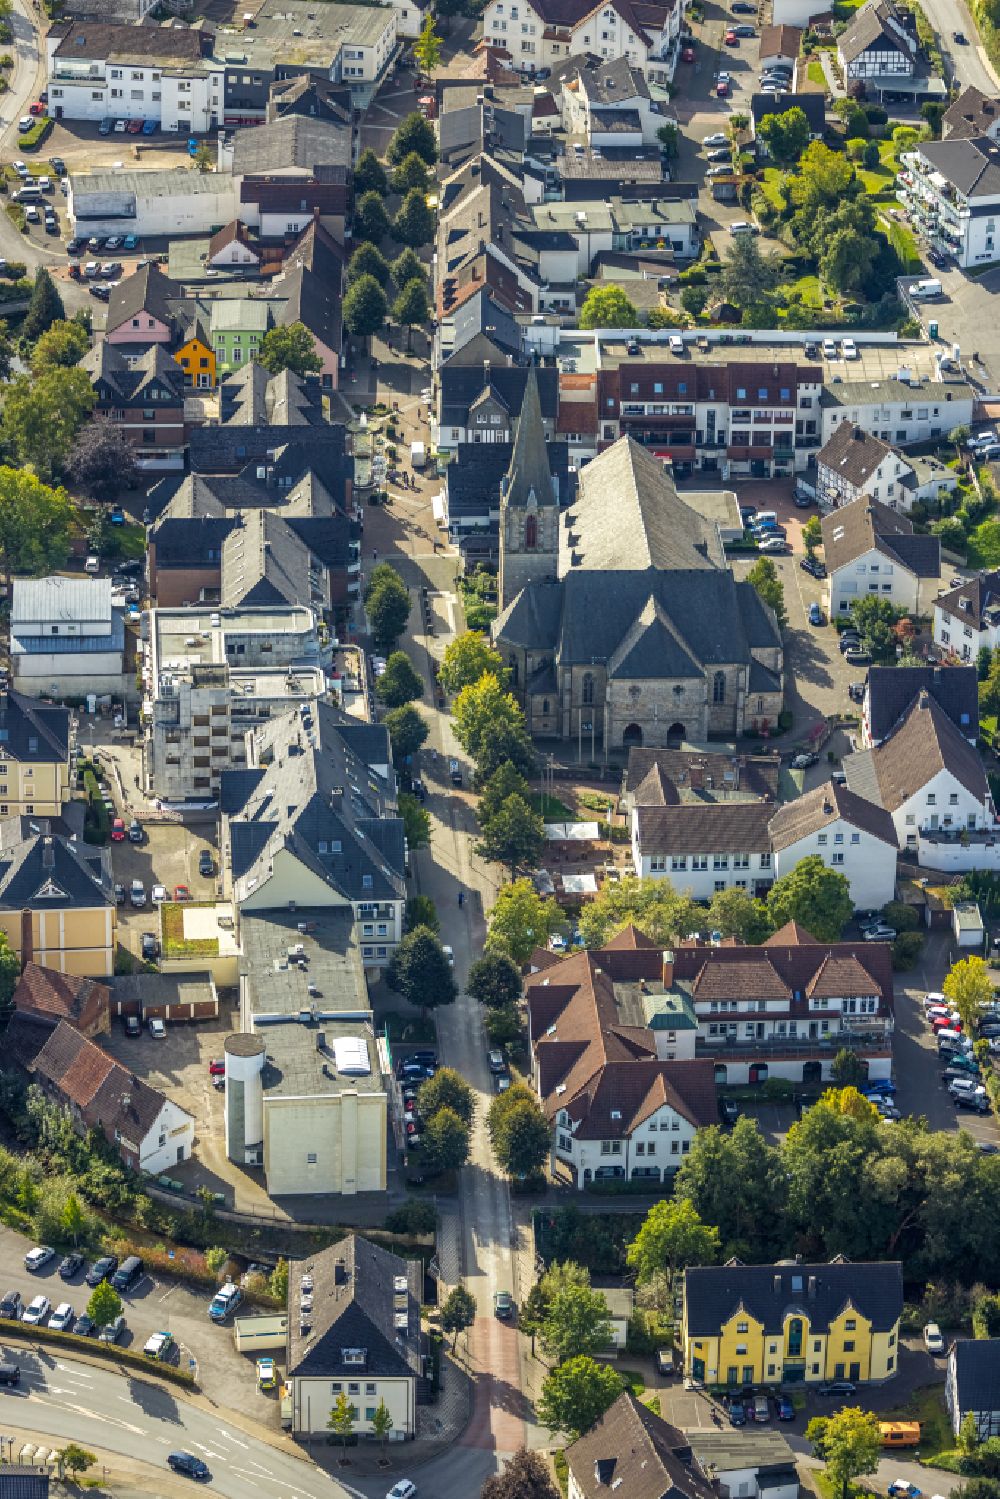 Aerial image Sundern (Sauerland) - The city center in the downtown area in Sundern (Sauerland) at Sauerland in the state North Rhine-Westphalia, Germany